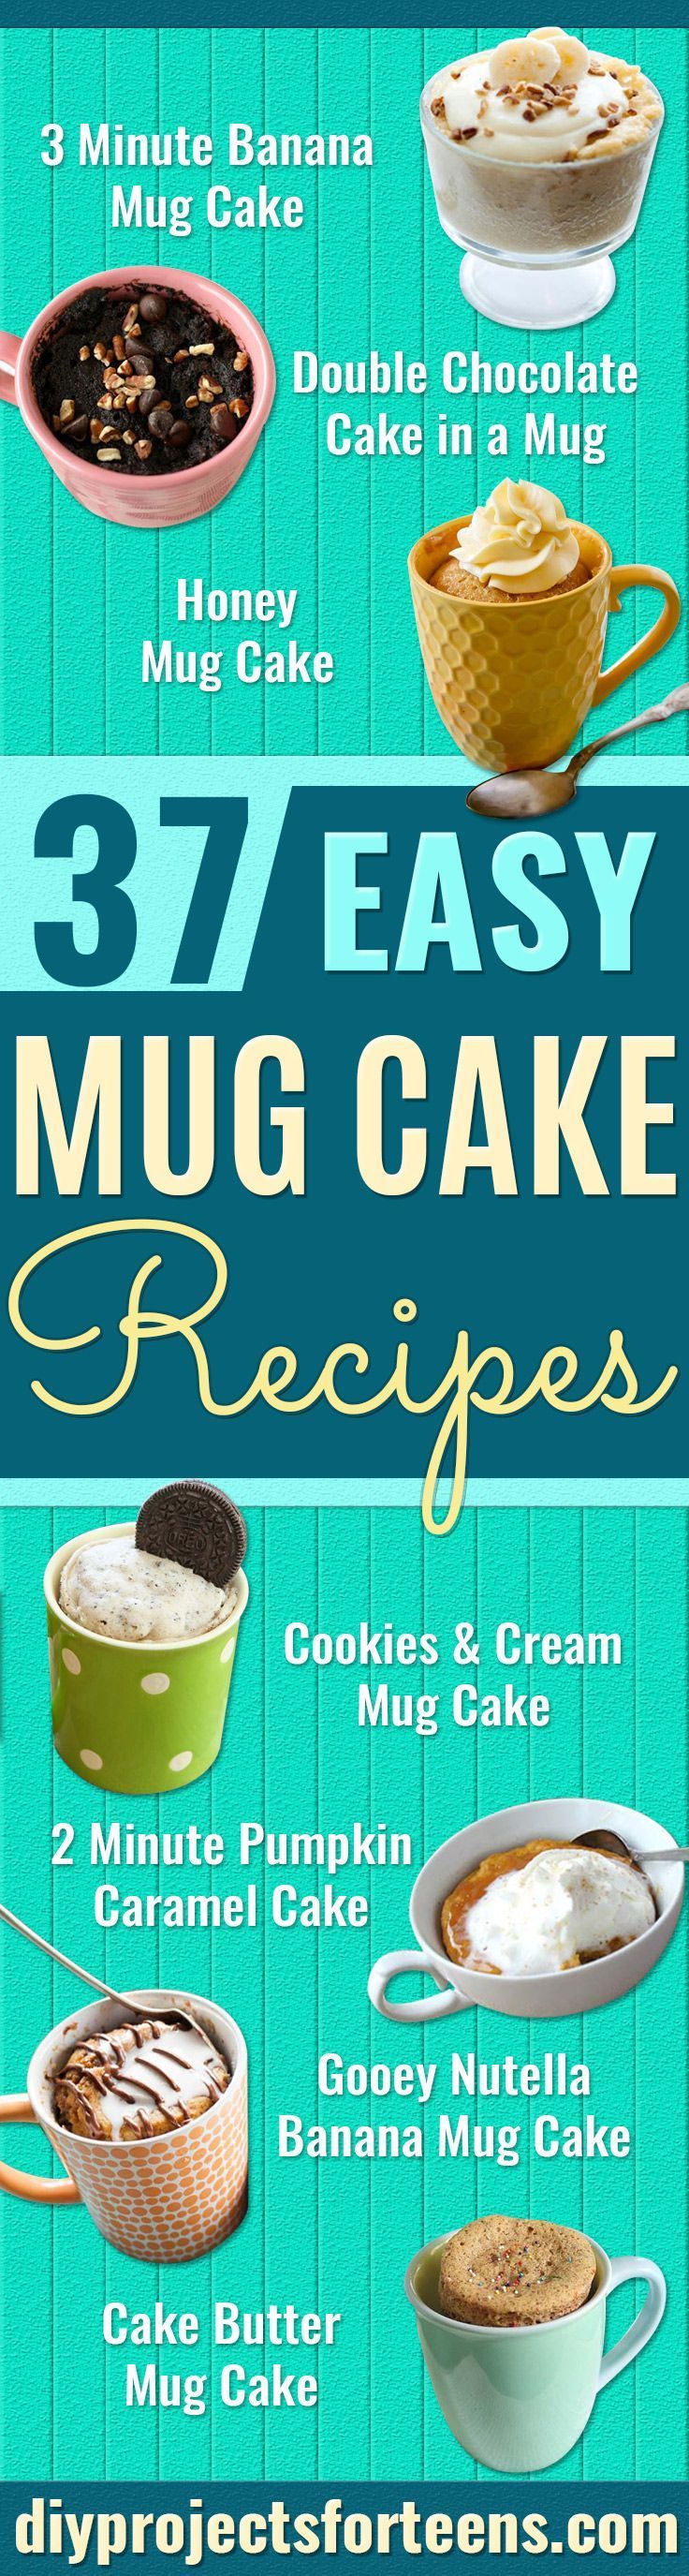 Easy Mug Cake Recipes – Best Microwave Cakes and Ideas for Baking Ckae in The Microwave – Chocolate, Vanilla, Healthy,